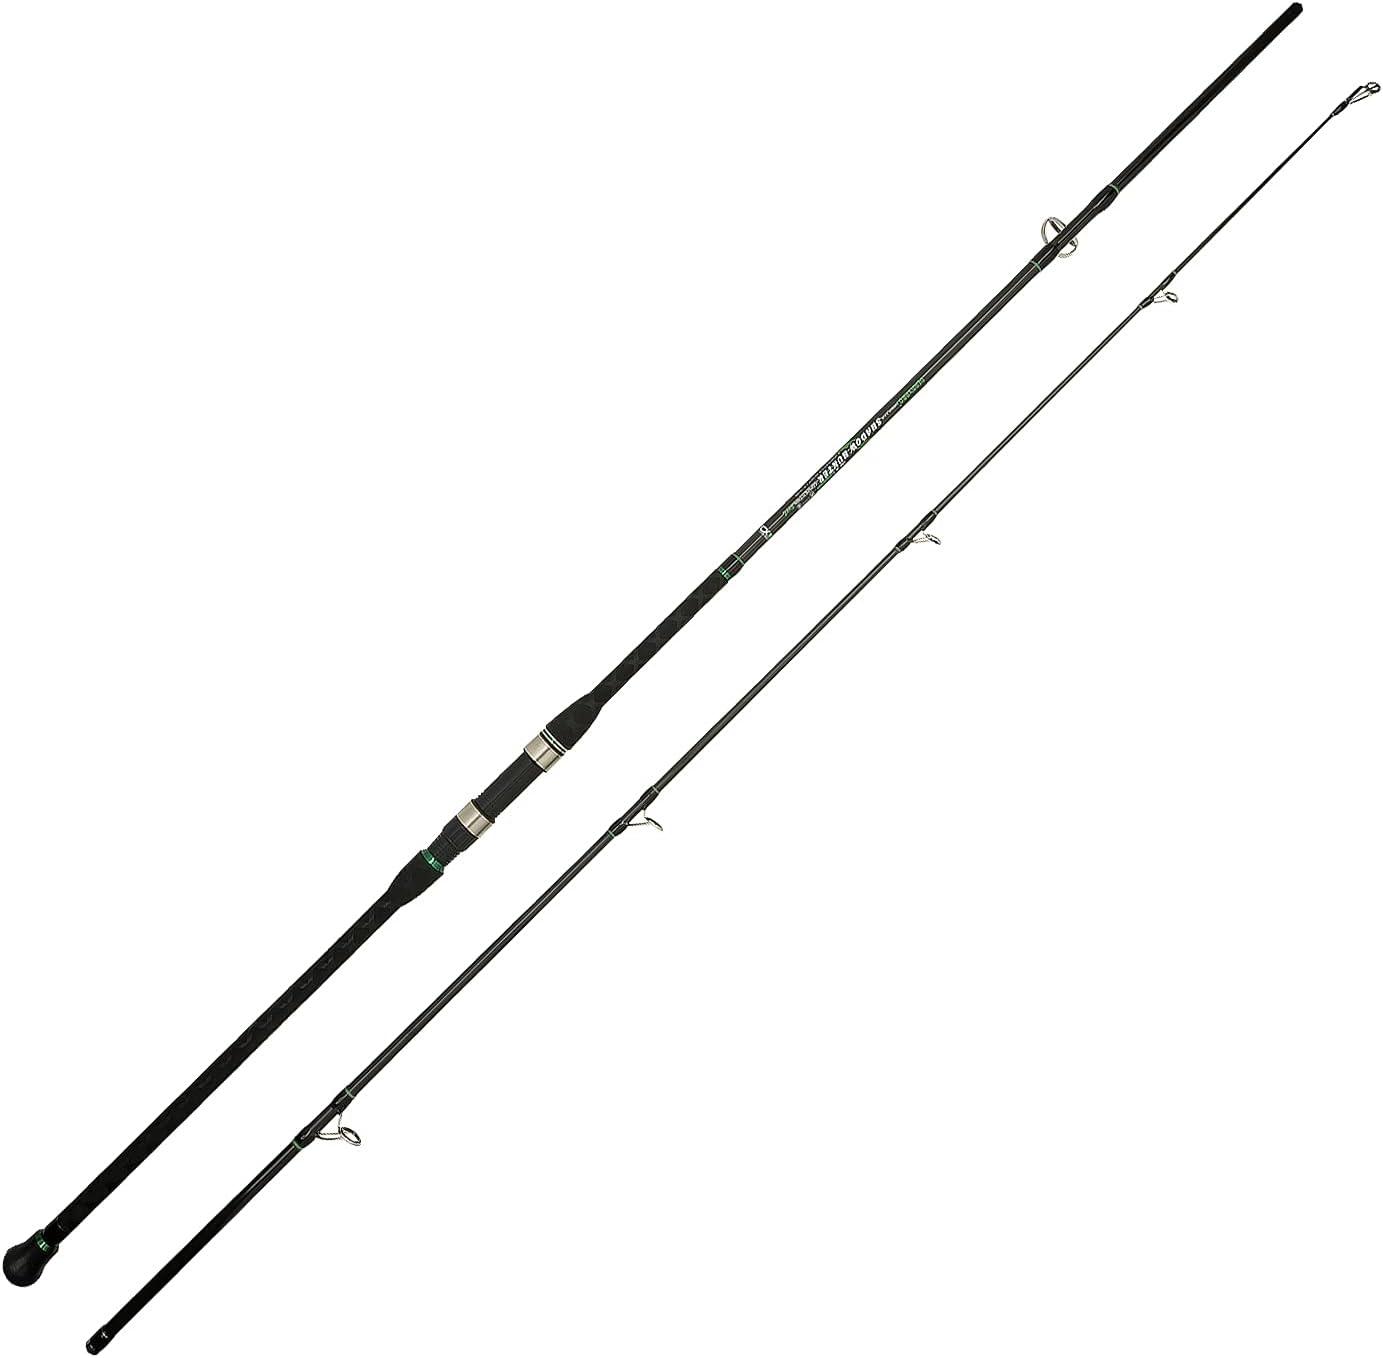  Fishing Rods - BERRYPRO / Fishing Rods / Fishing Rods &  Accessories: Sports & Outdoors